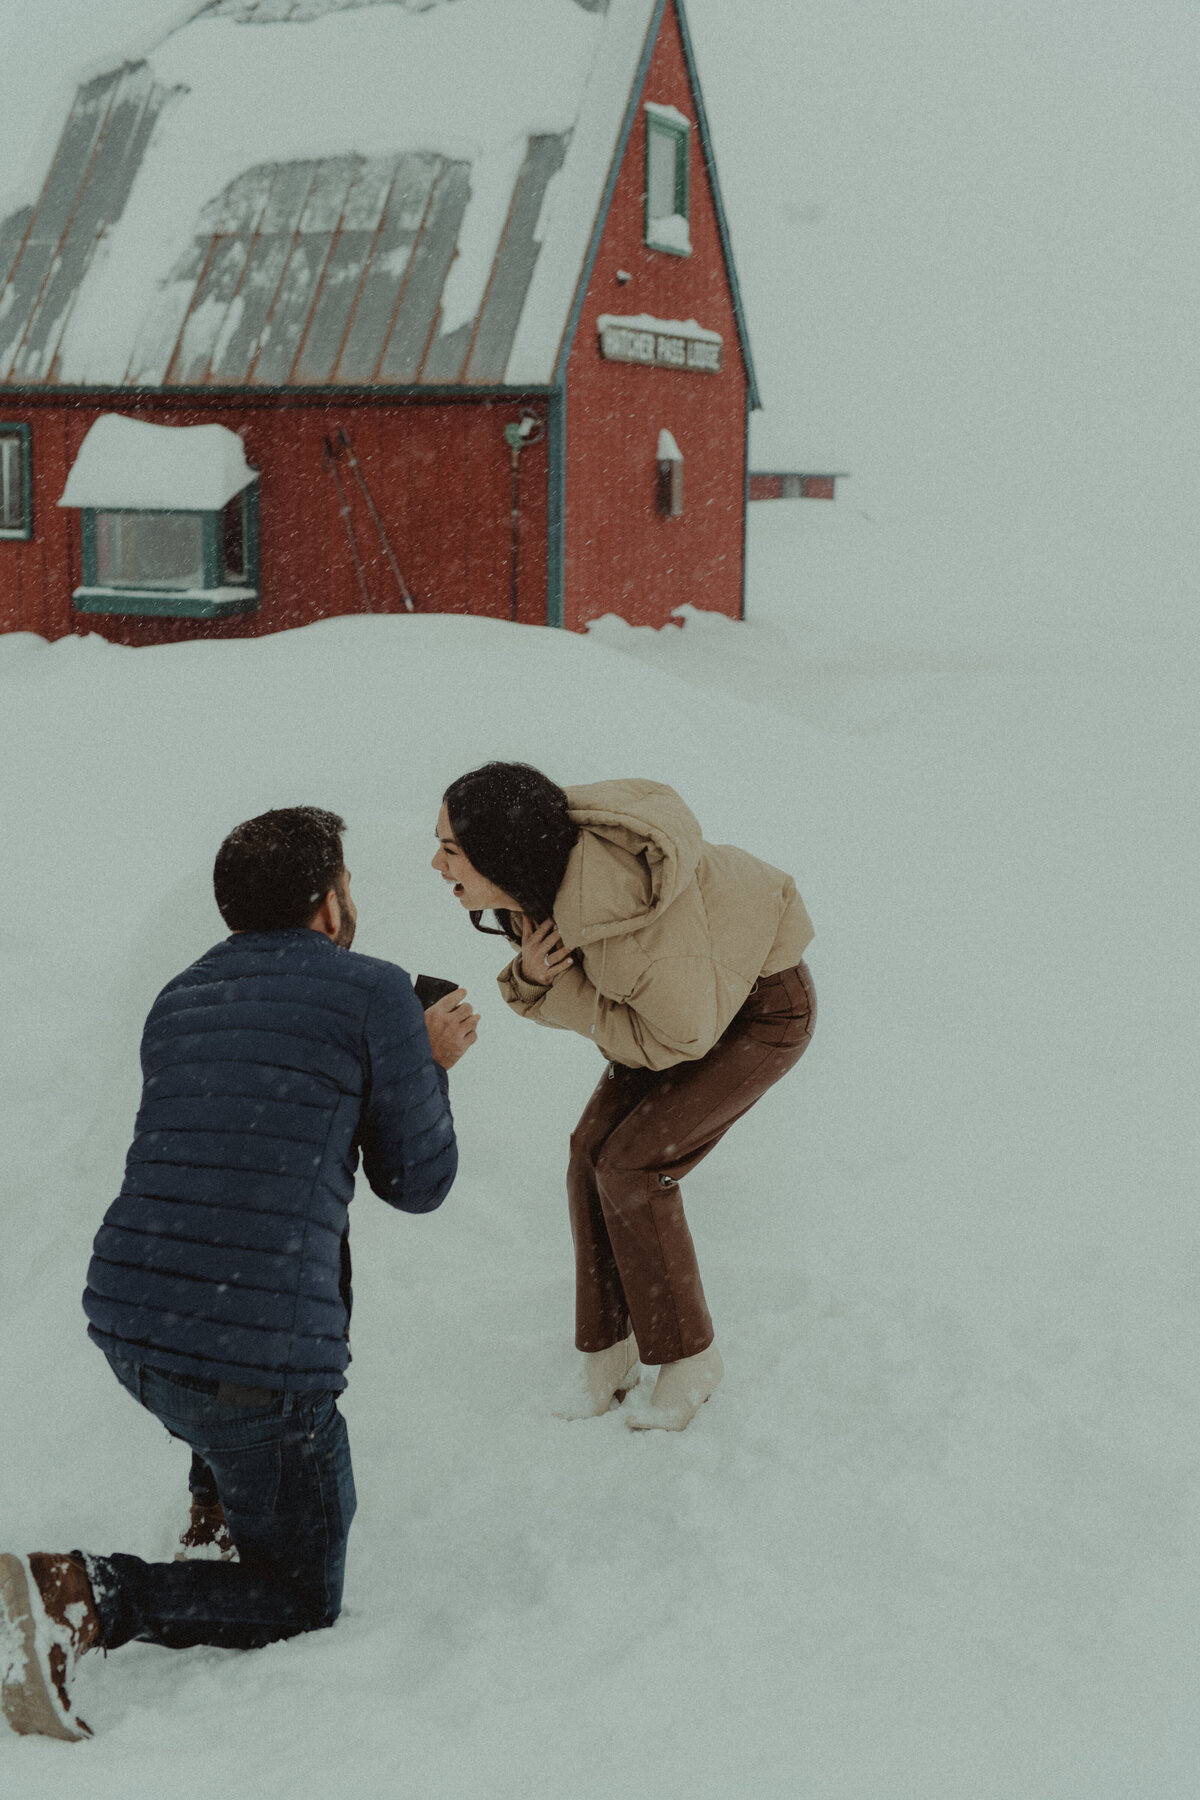 proposal photos in the snow